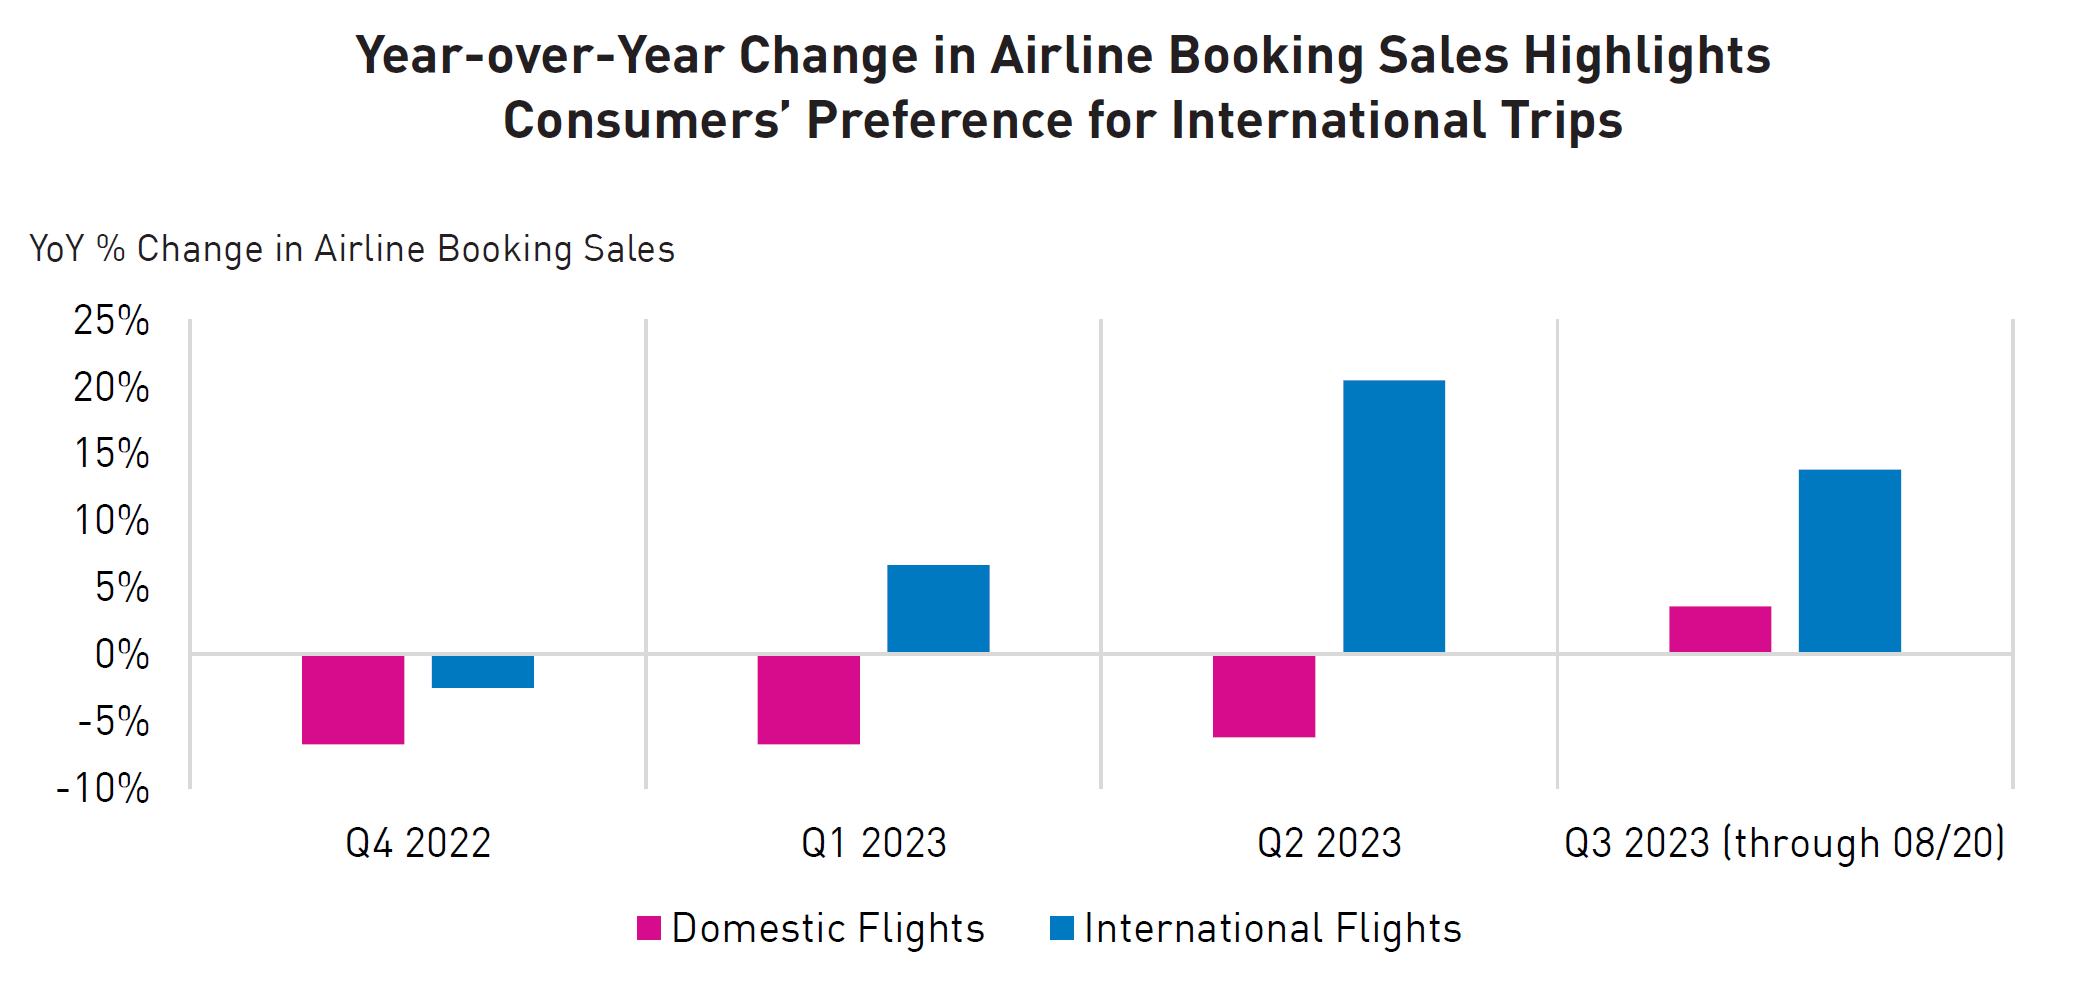 Year-over-Year Change in Airline Booking Sales Highlights Consumers’ Preference for International Trips